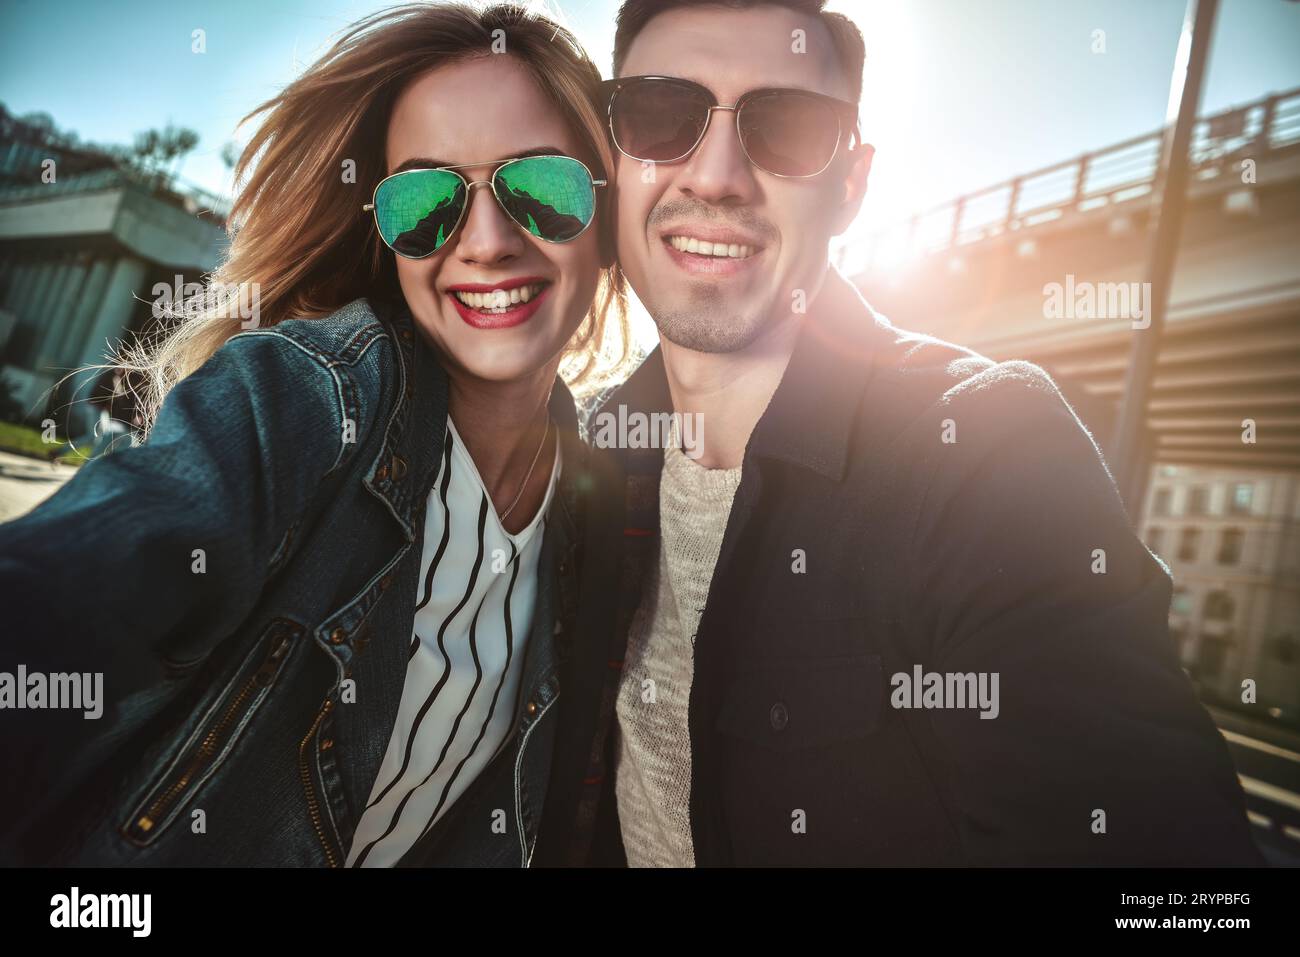 Happy young couple in love takes selfie portrait. Stock Photo